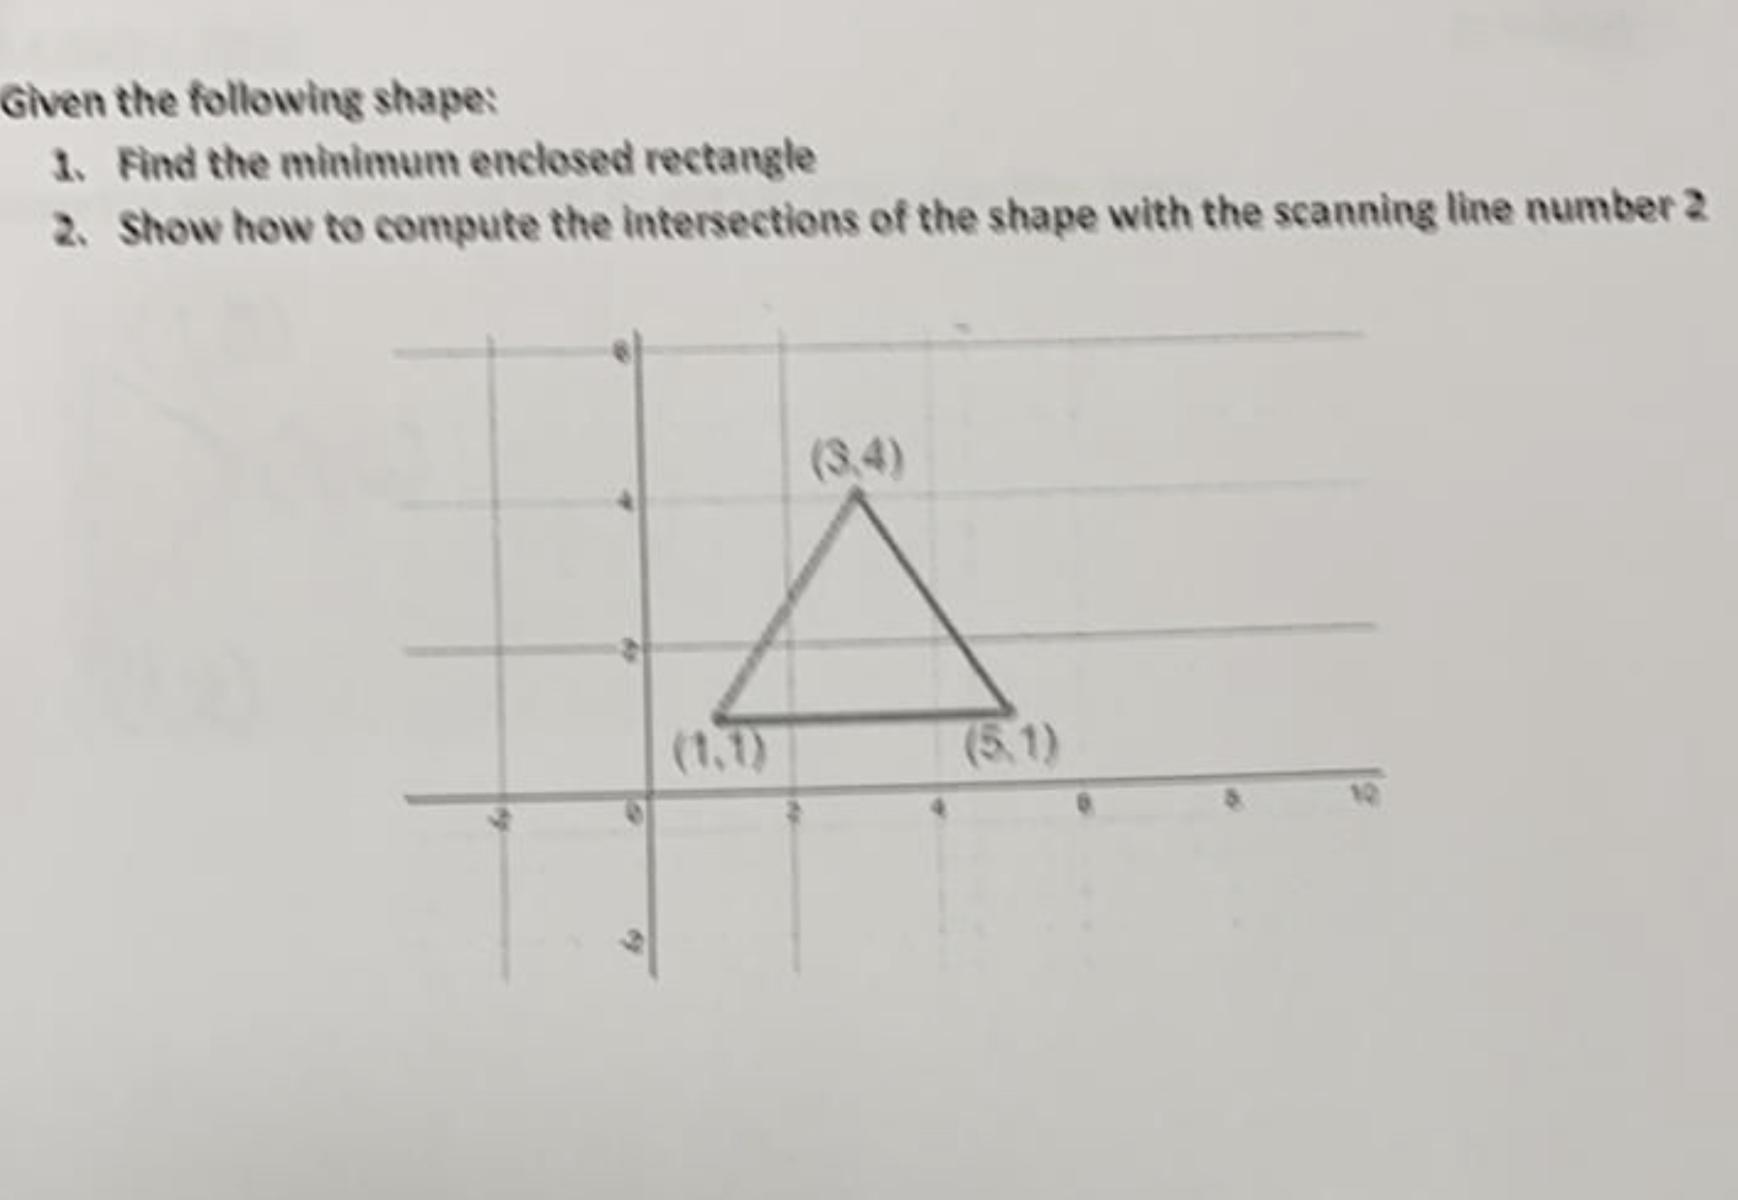 Given the following shape: 1. Find the minimum enclosed rectangle 2. Show how to compute the intersections of